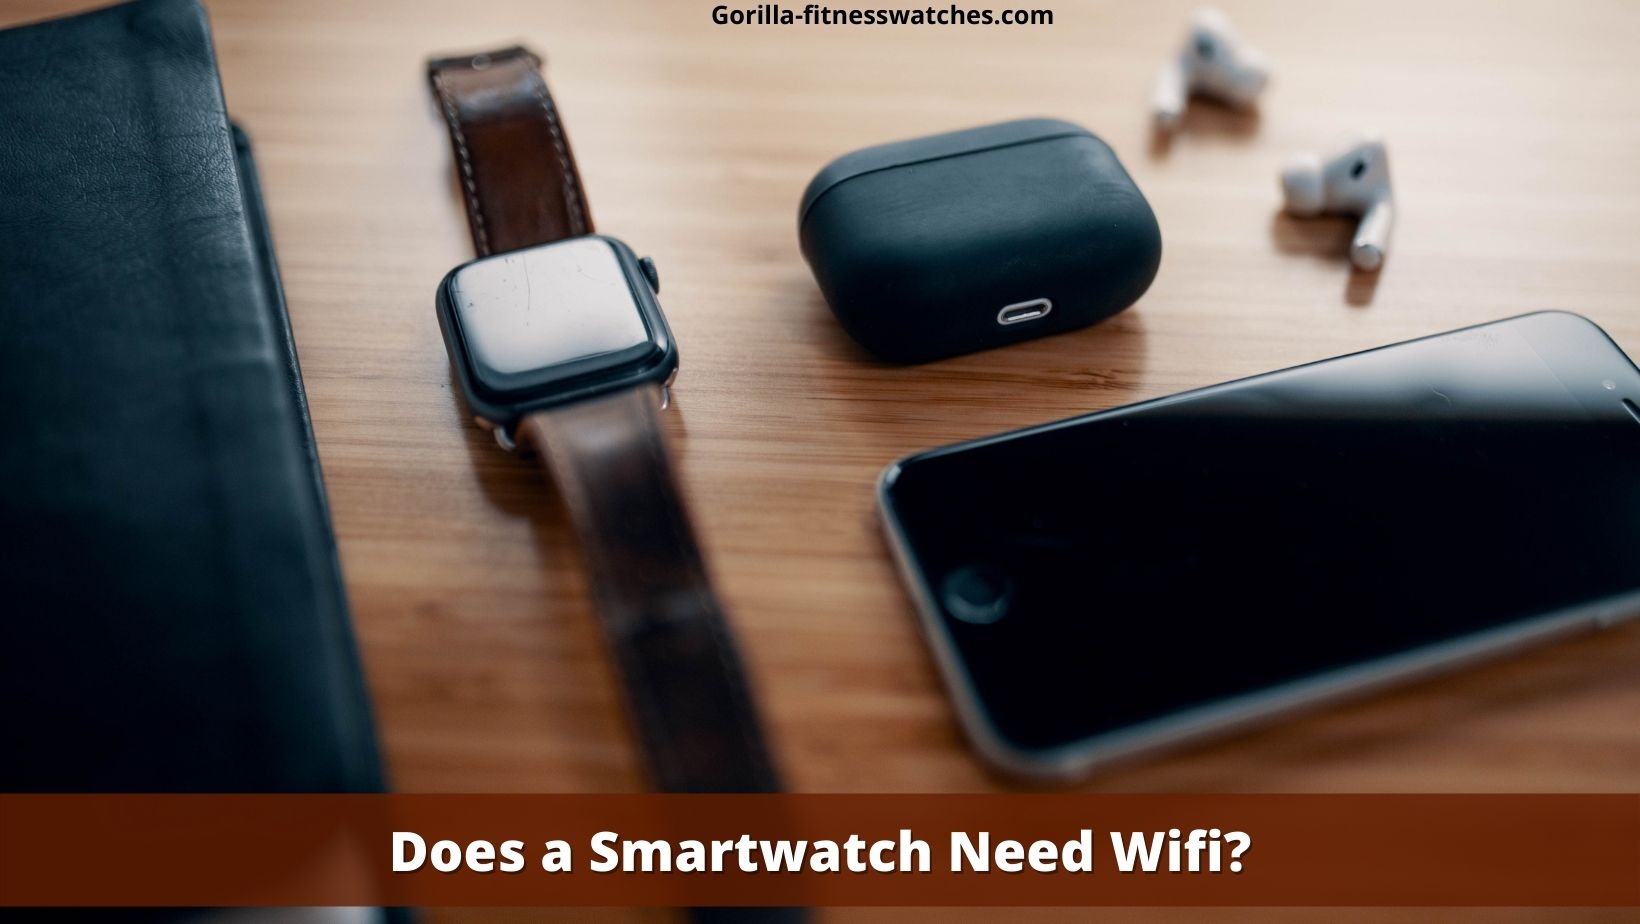 Does a smartwatch need wifi?